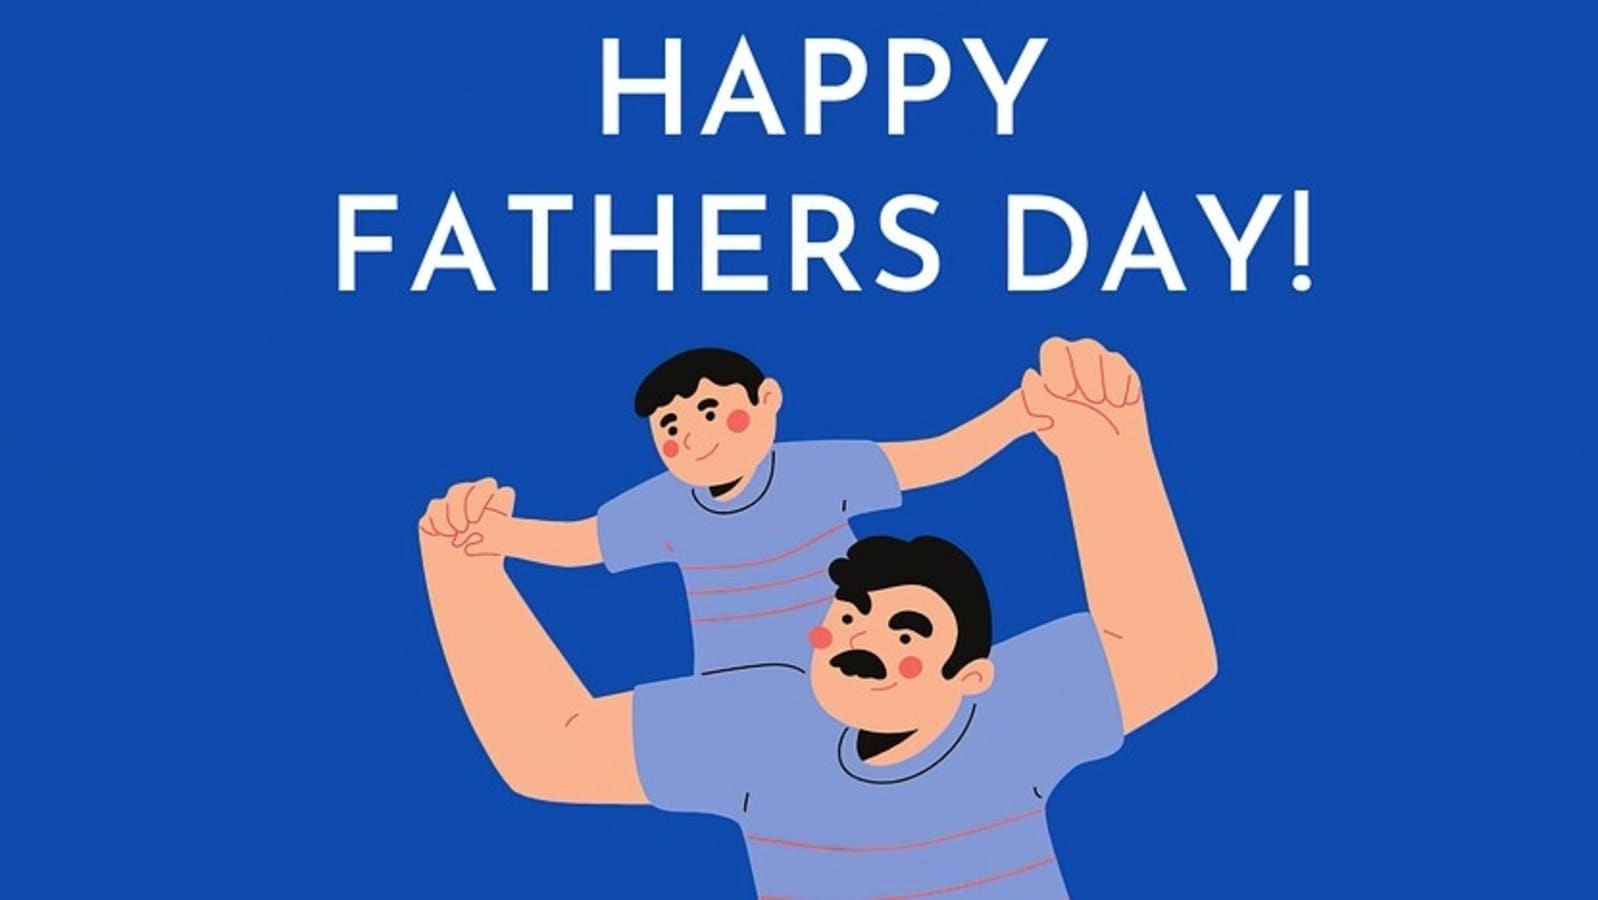 Happy Father's Day 2022 WhatsApp stickers: How to share Happy Father's Day  WhatsApp wishes | How-to